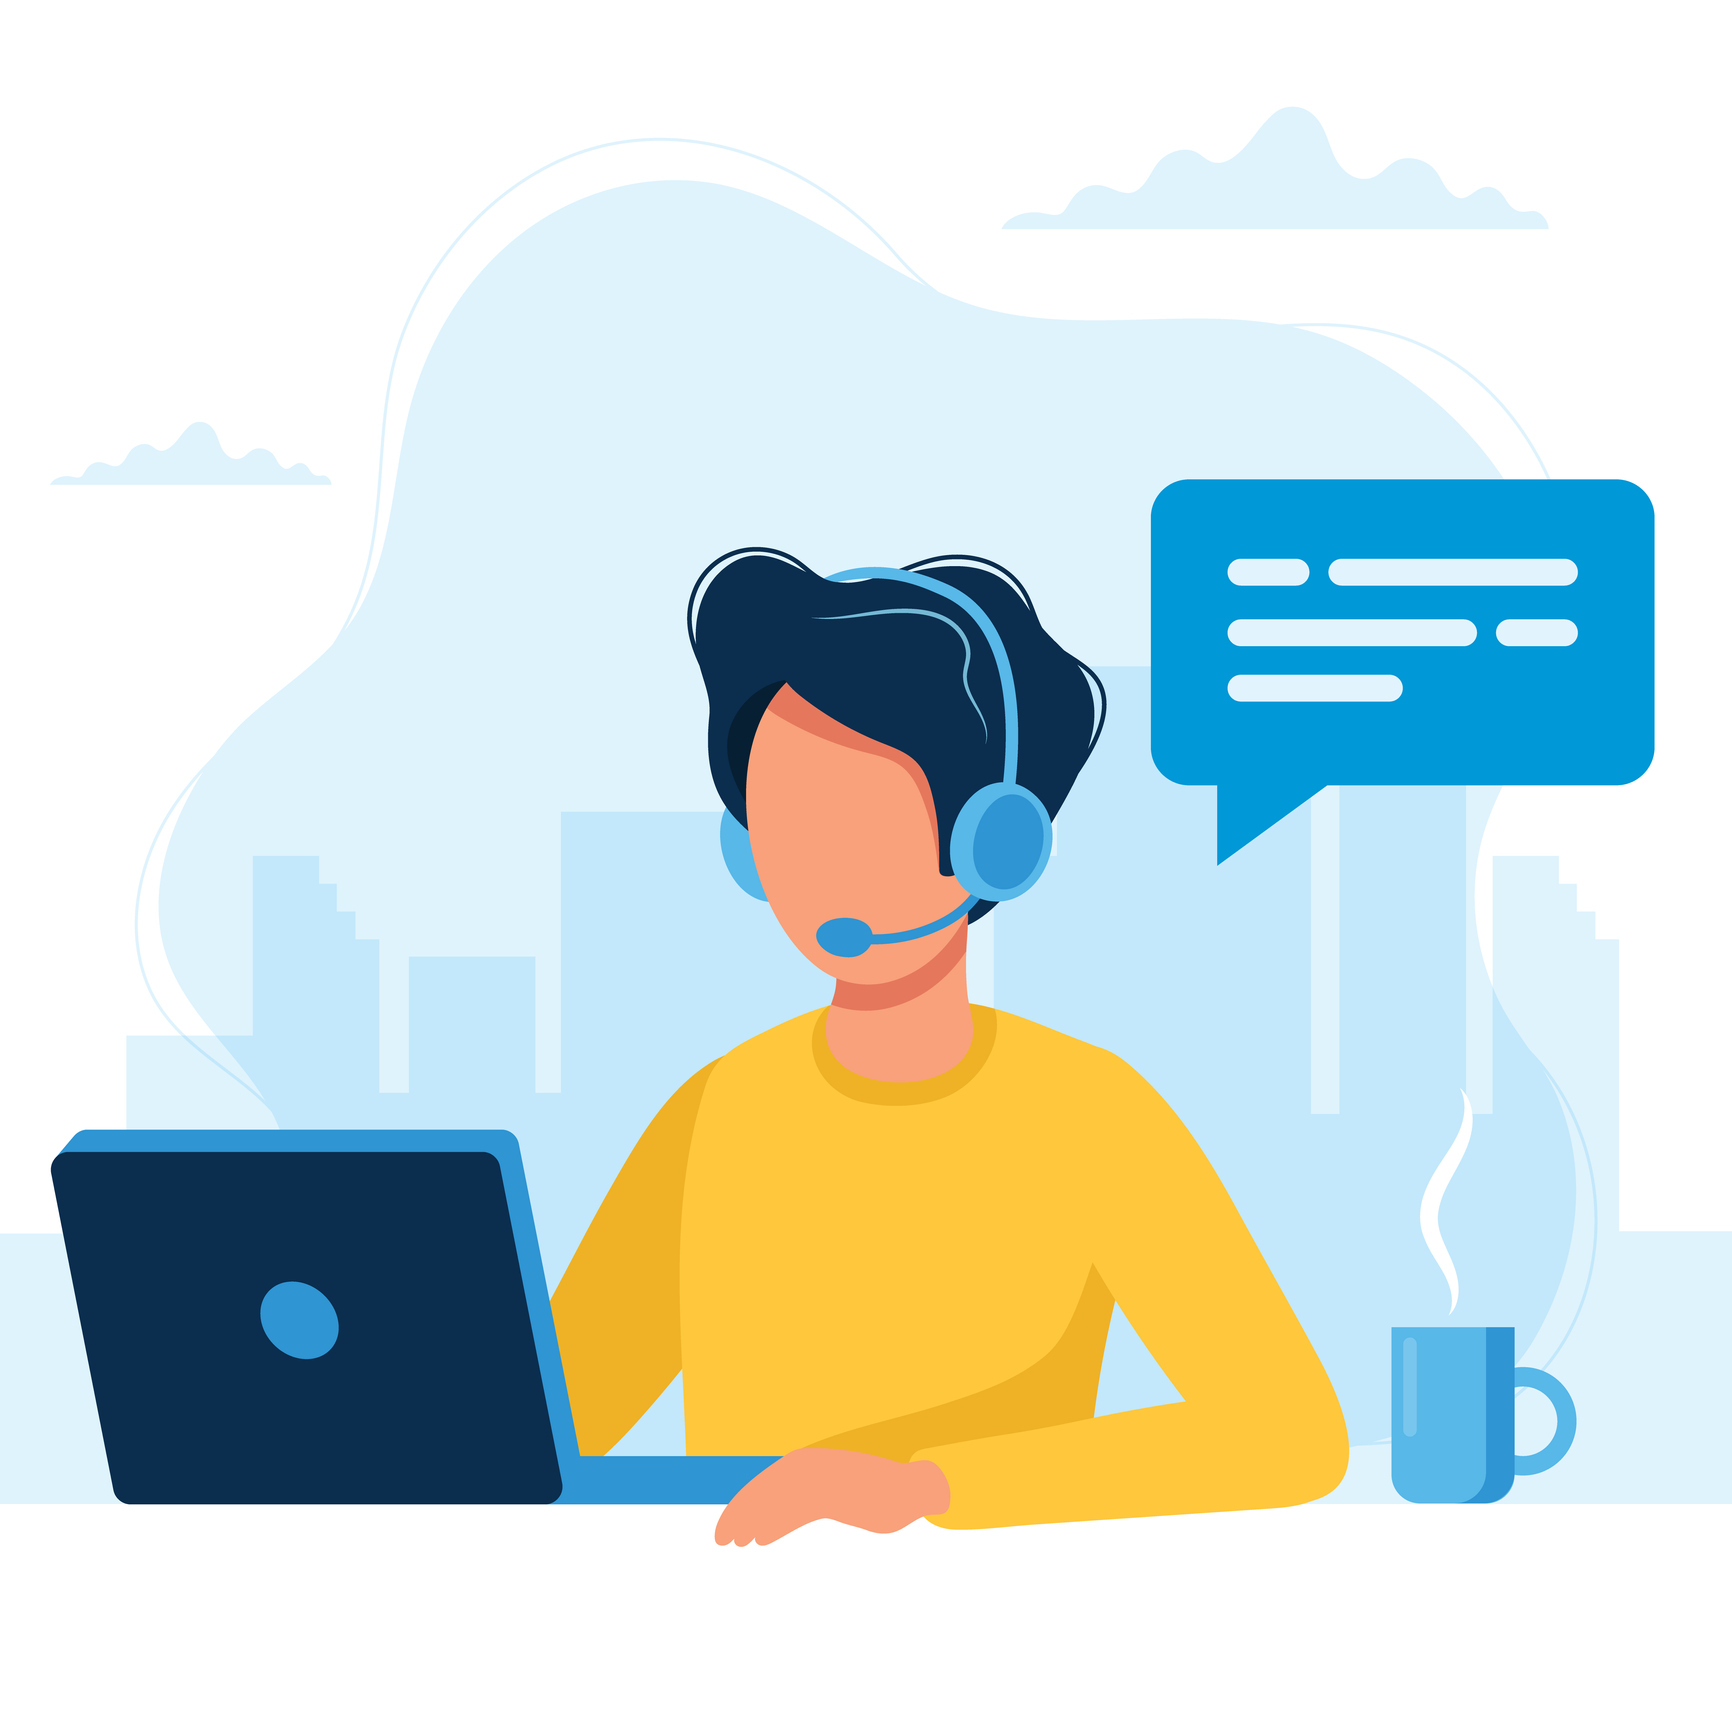 Illustration of a person in an online meeting